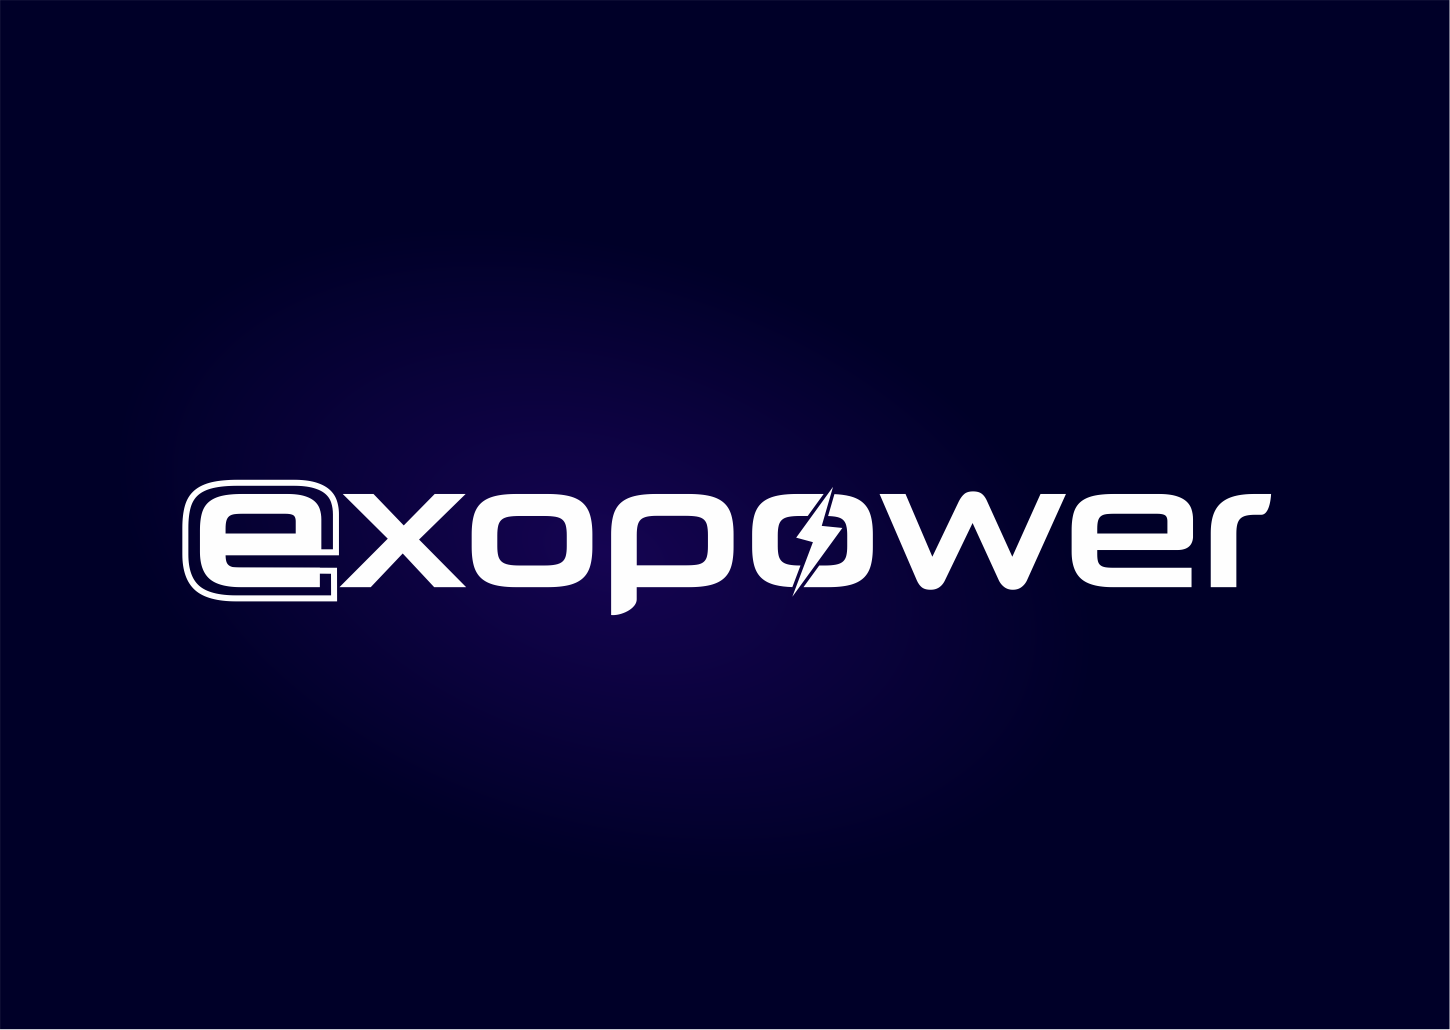 exopower.png